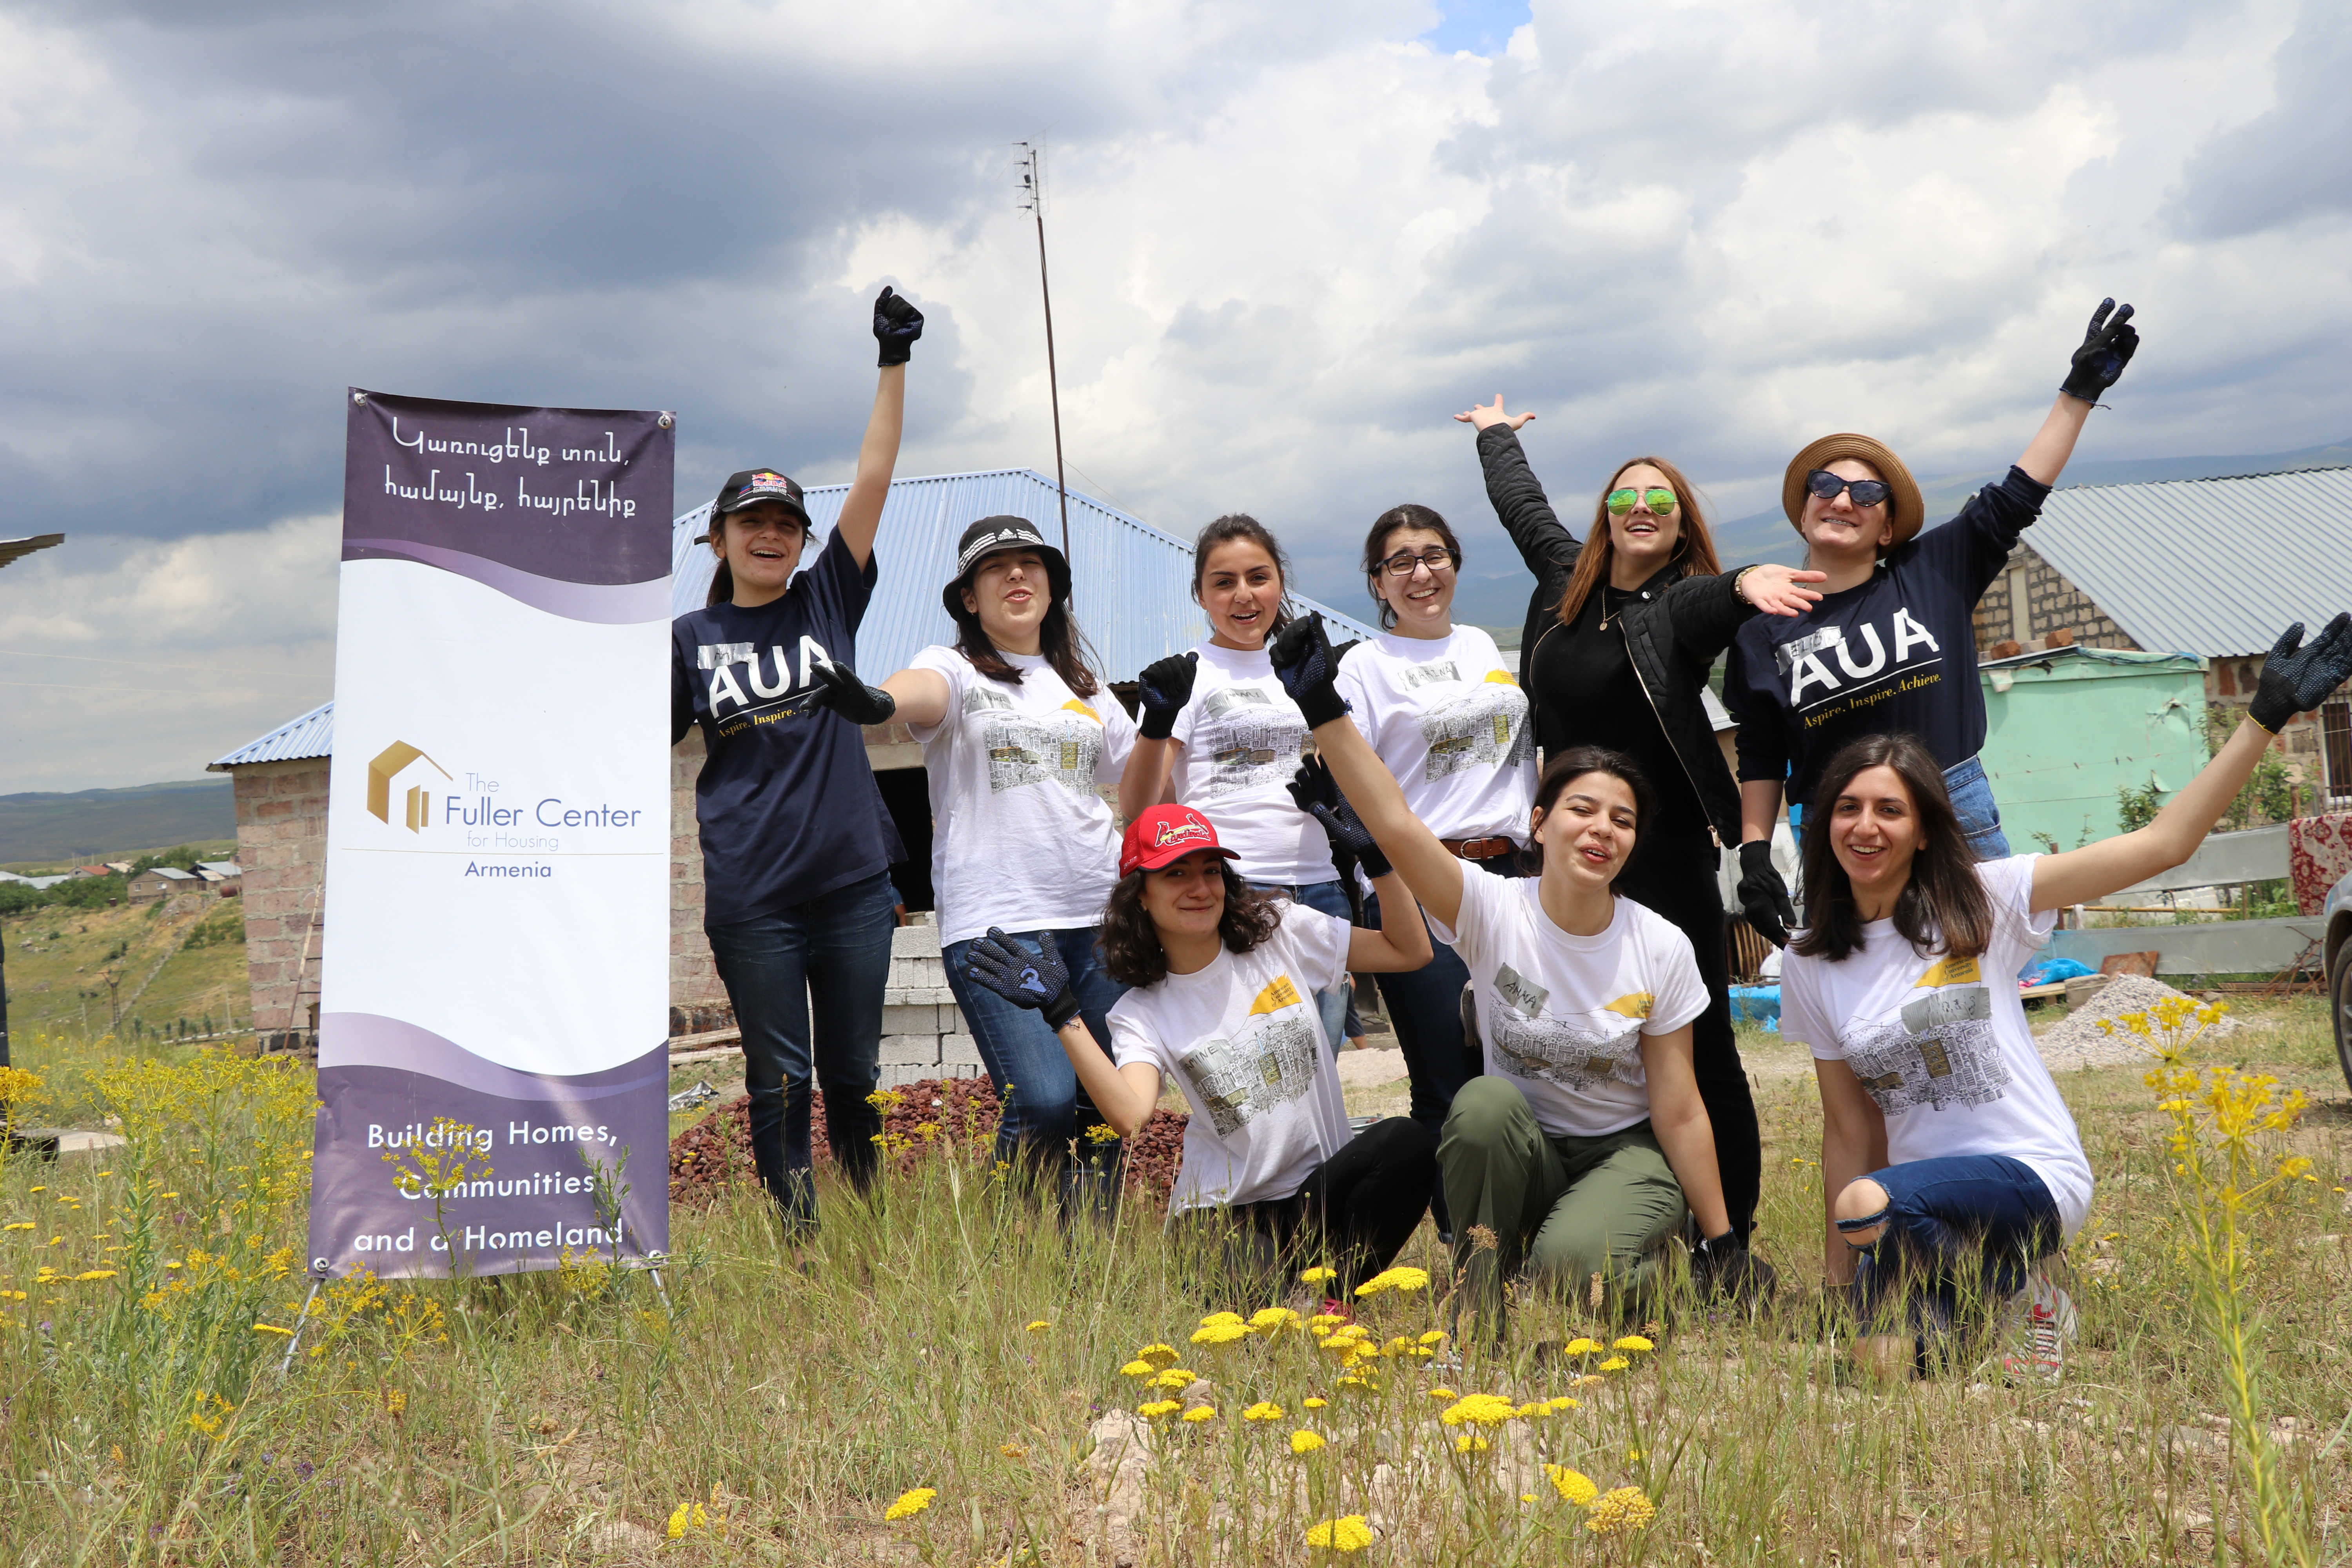 AUA Ladies Build! American University of Armenia (AUA) Volunteer Students Help Build a Decent Home for a Family in Need